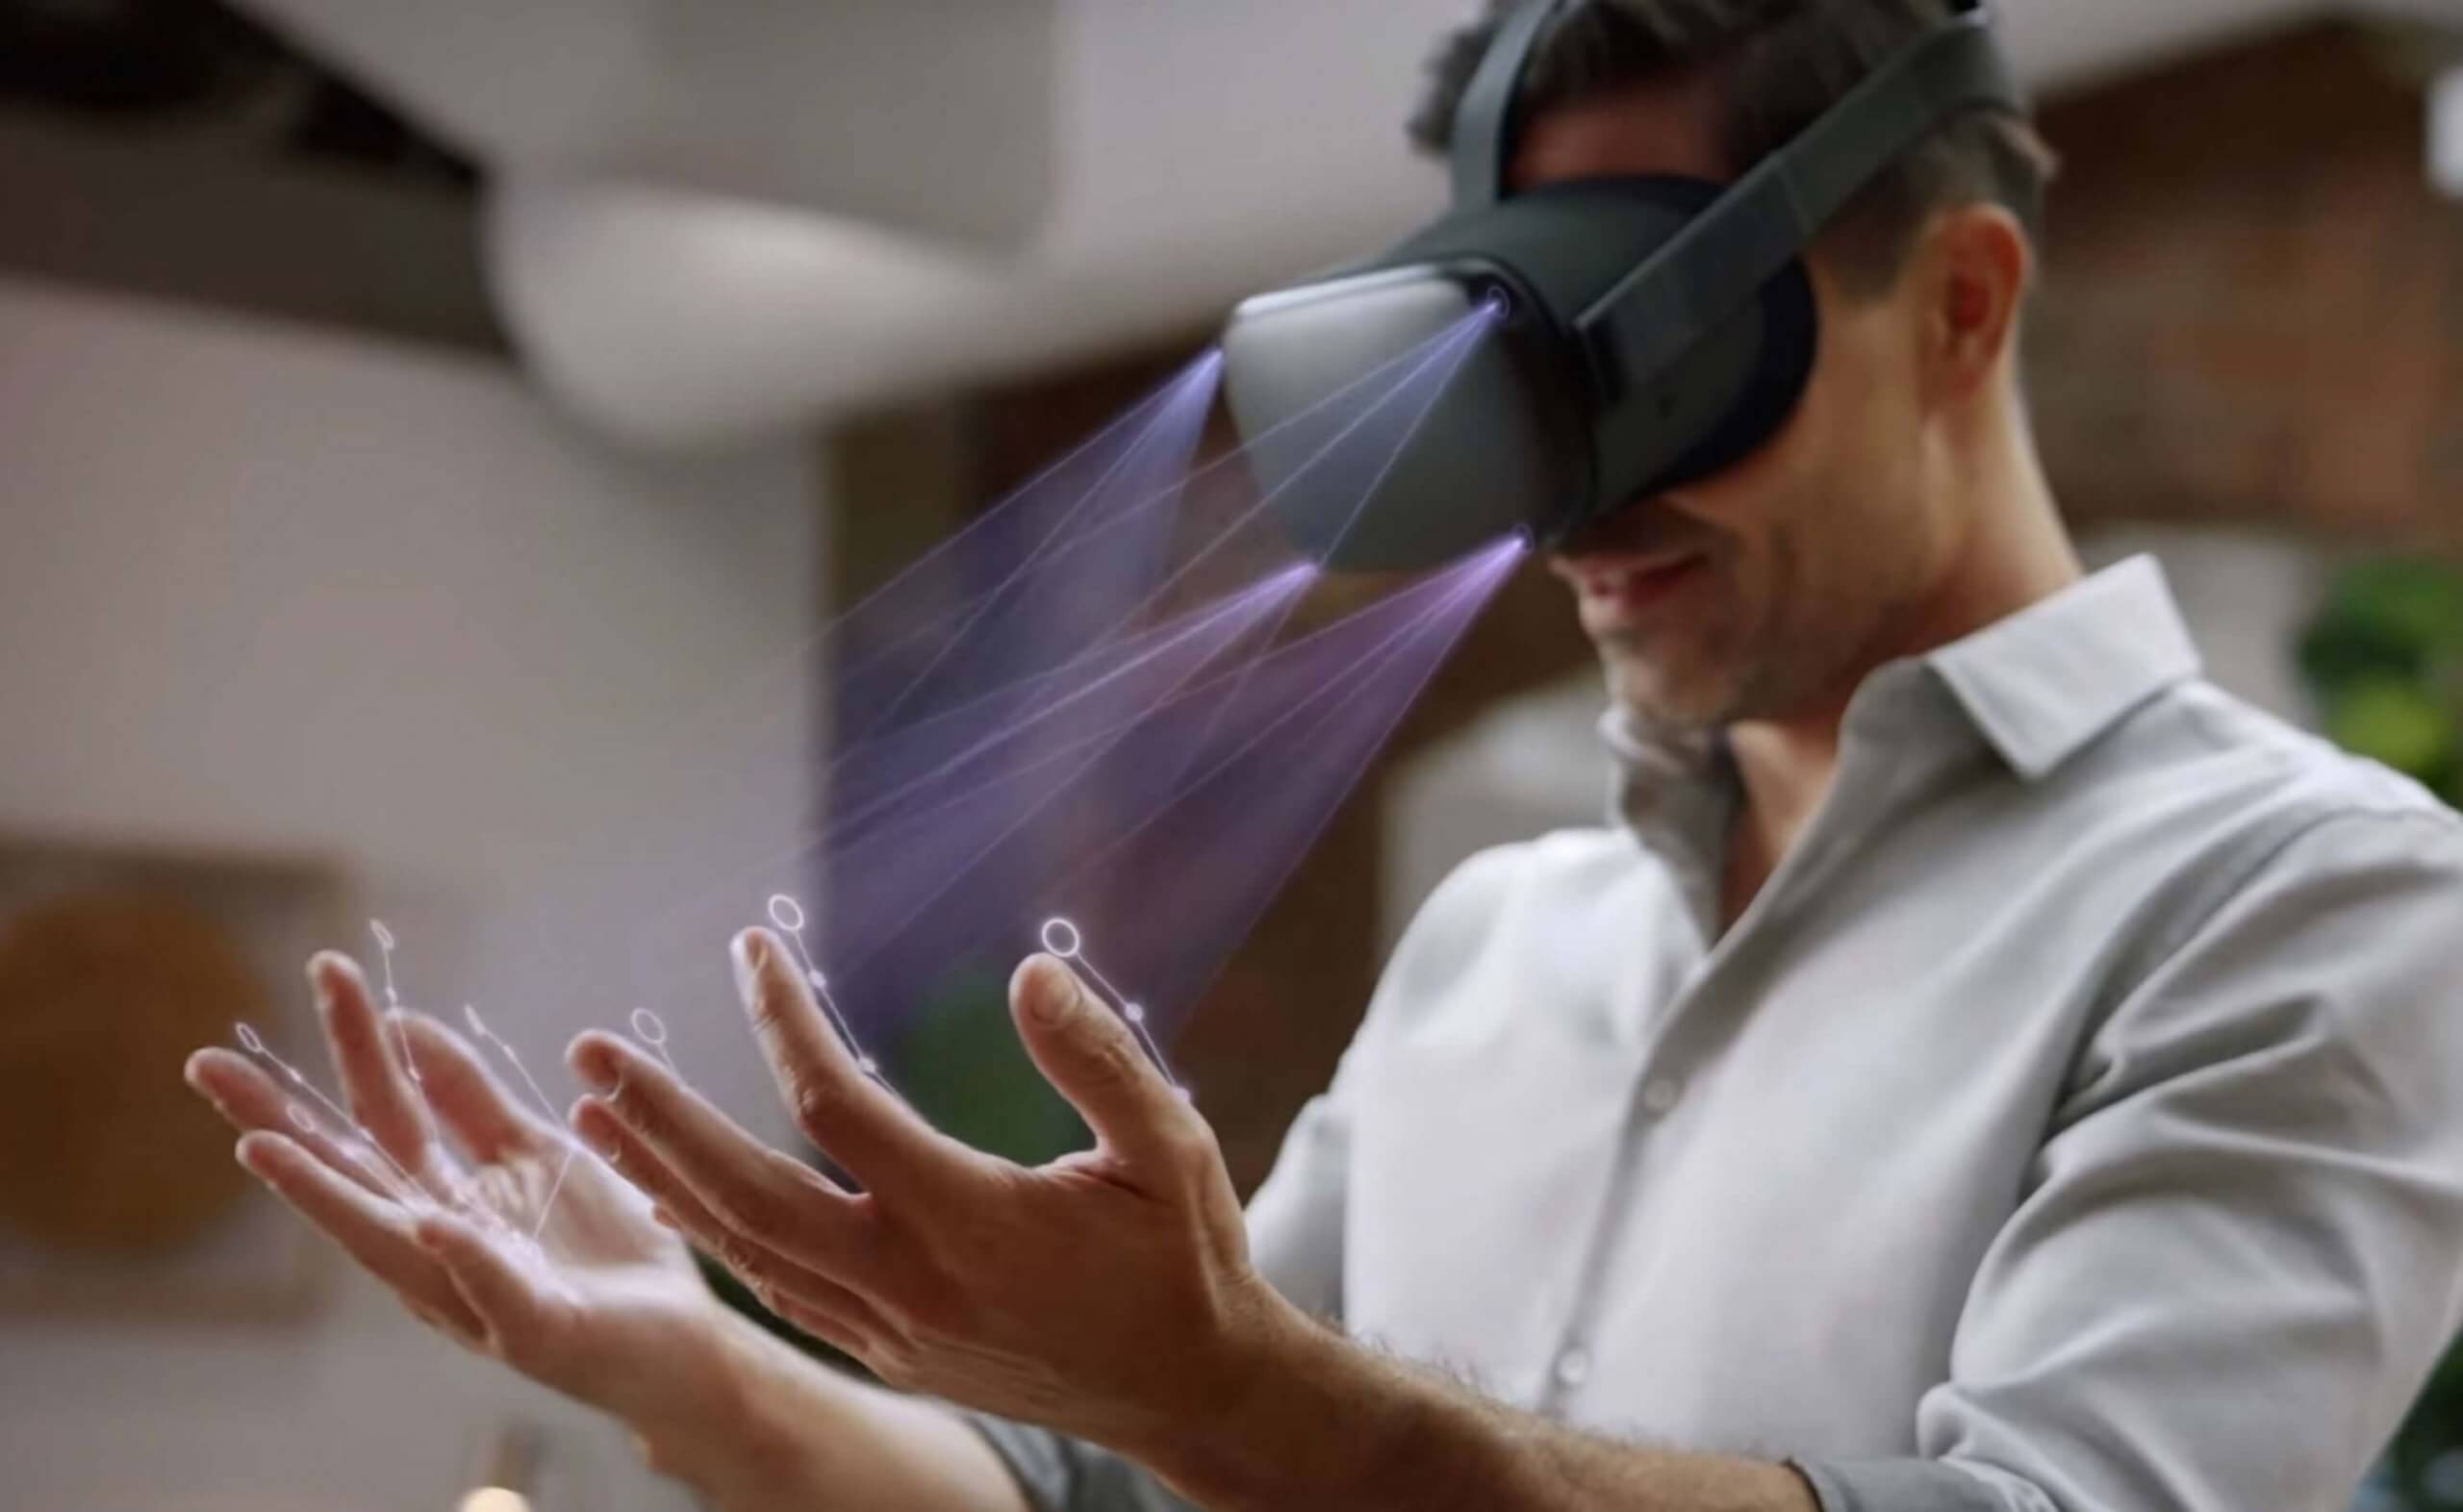 Oculus Quest gesture controls arrive early as an experimental setting